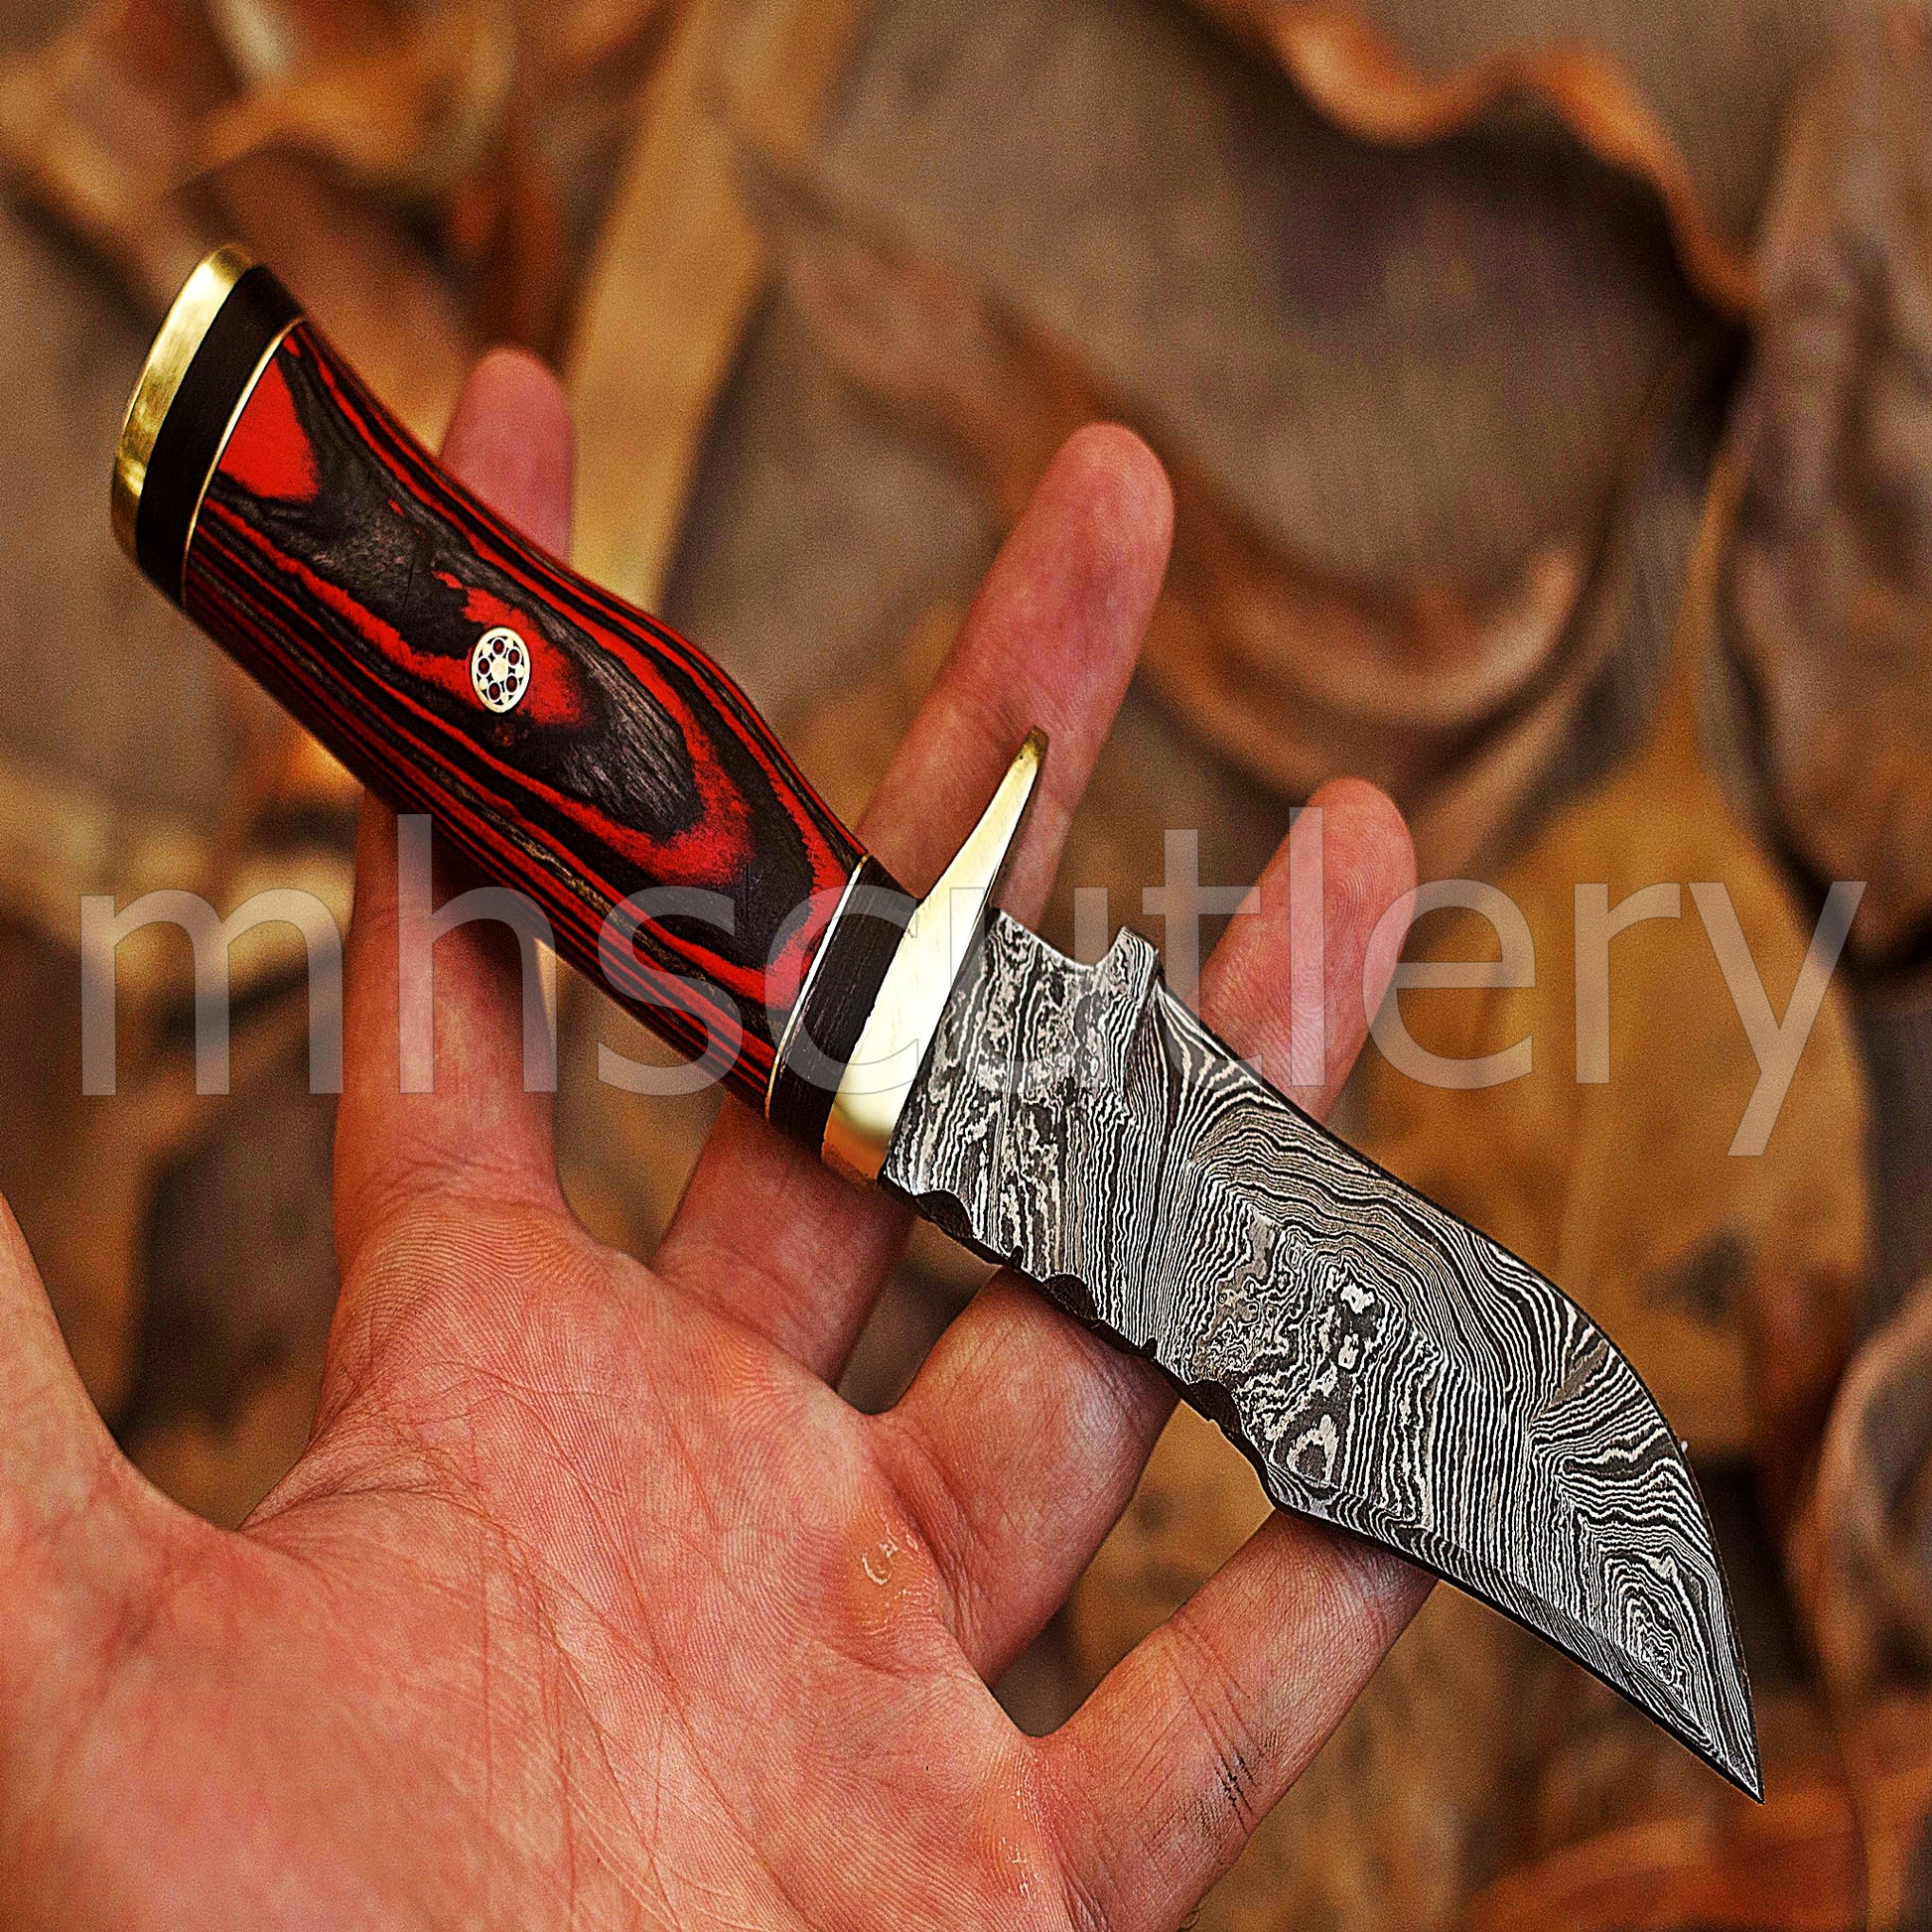 Hand Forged Damascus Steel Rat Tail Skinner Knife With Pakka Wood Handle | mhscutlery